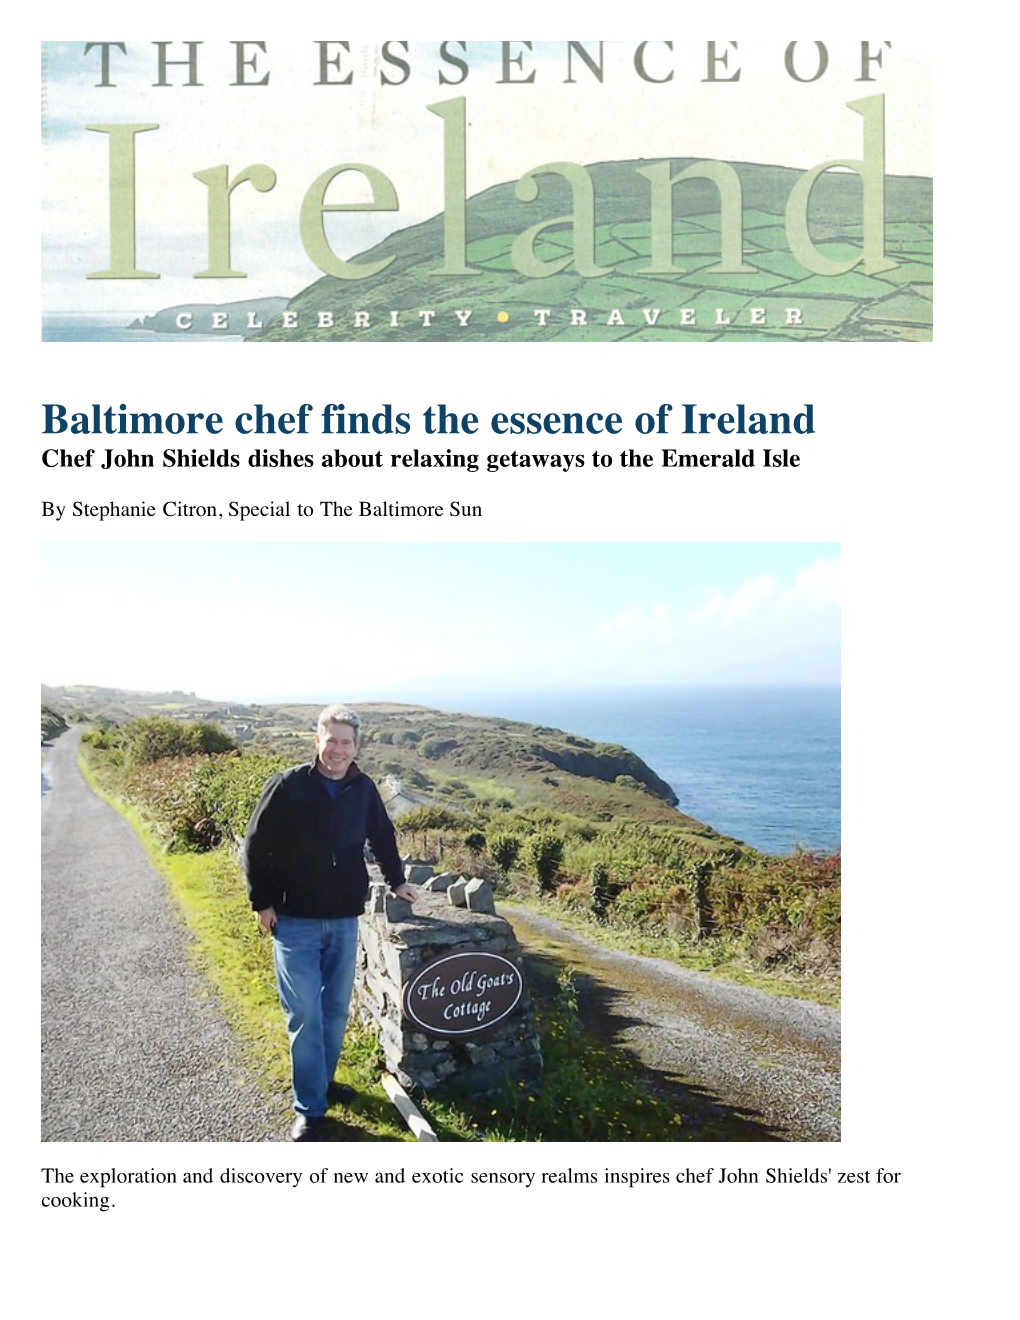 Chef John Shields Dishes About Relaxing Getaways to the Emerald Isle